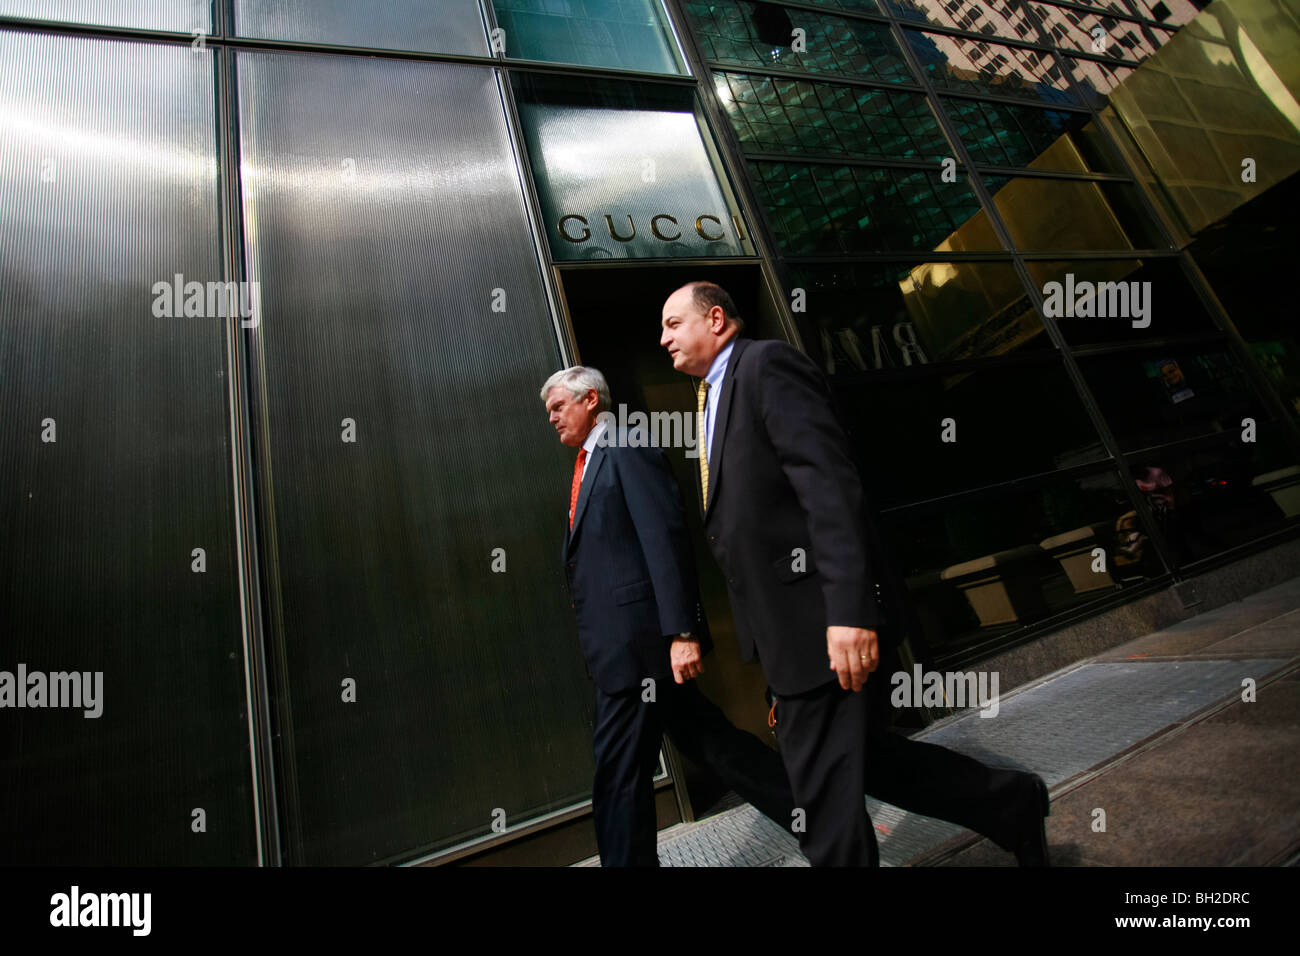 Business men walking by the Gucci store on the 5th Avenue Stock Photo